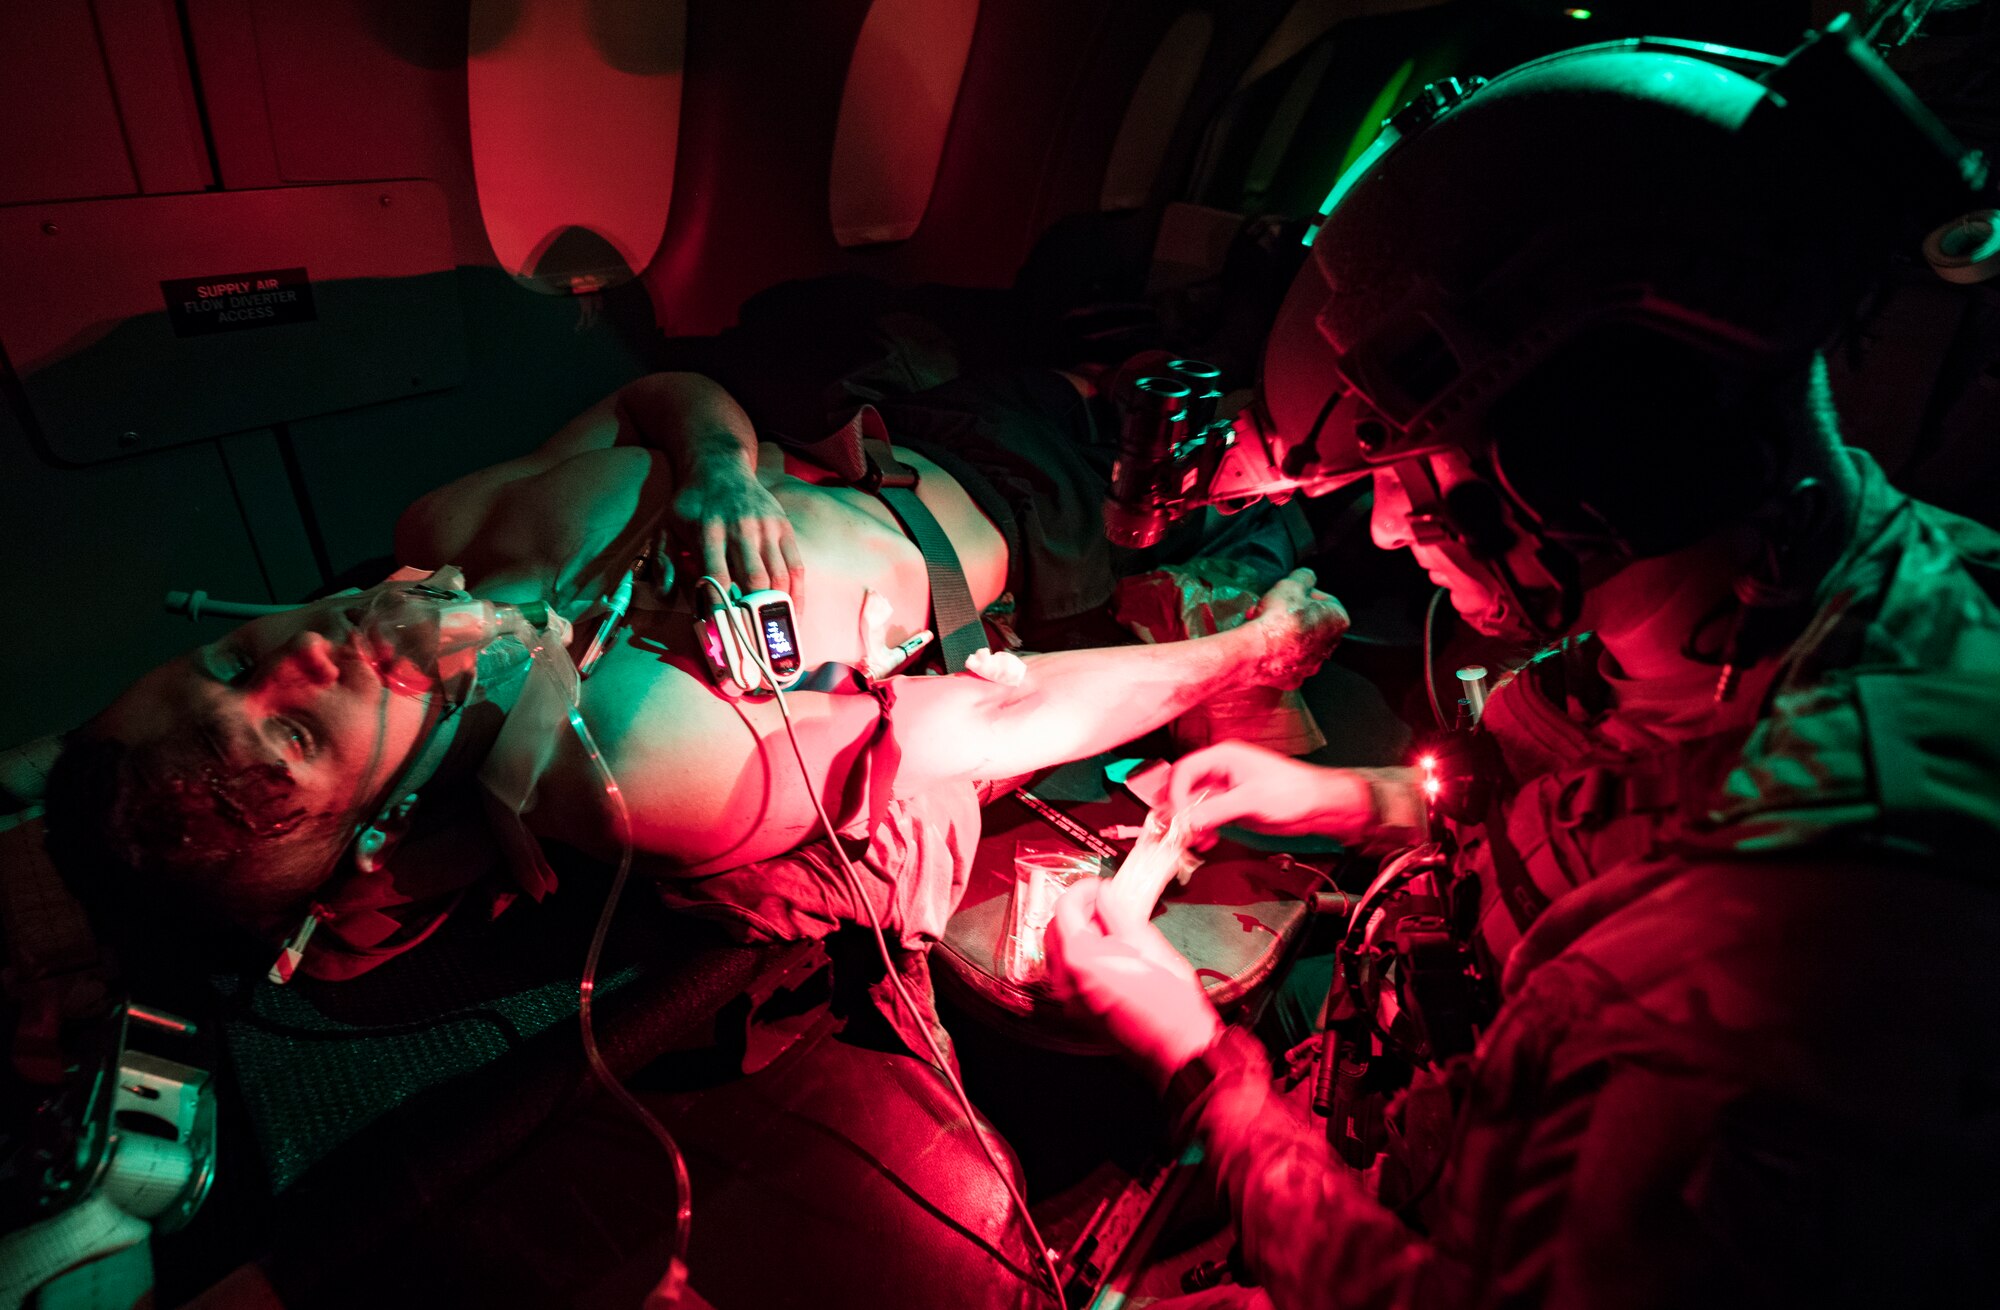 A U.S. Air Force special operations force medical element works with Royal Danish Air Force medical personnel to treat patients aboard a C-146 Dornier aircraft at Hurlburt Field, Fla., during flight operations for casualty evacuation and critical care training as part of exercise Emerald Warrior 19, Jan. 17, 2019. Emerald Warrior provides annual realistic and relevant pre-deployment training, encompassing multiple joint operating areas. This training prepares special operations forces, conventional force enablers, partner nations, and interagency elements to integrate with and execute full-spectrum special operations in a complex and uncertain irregular warfare security environment, and uses aspects of live, virtual, and constructive training assets. (U.S. Air Force photo by Tech. Sgt. Gregory Brook)